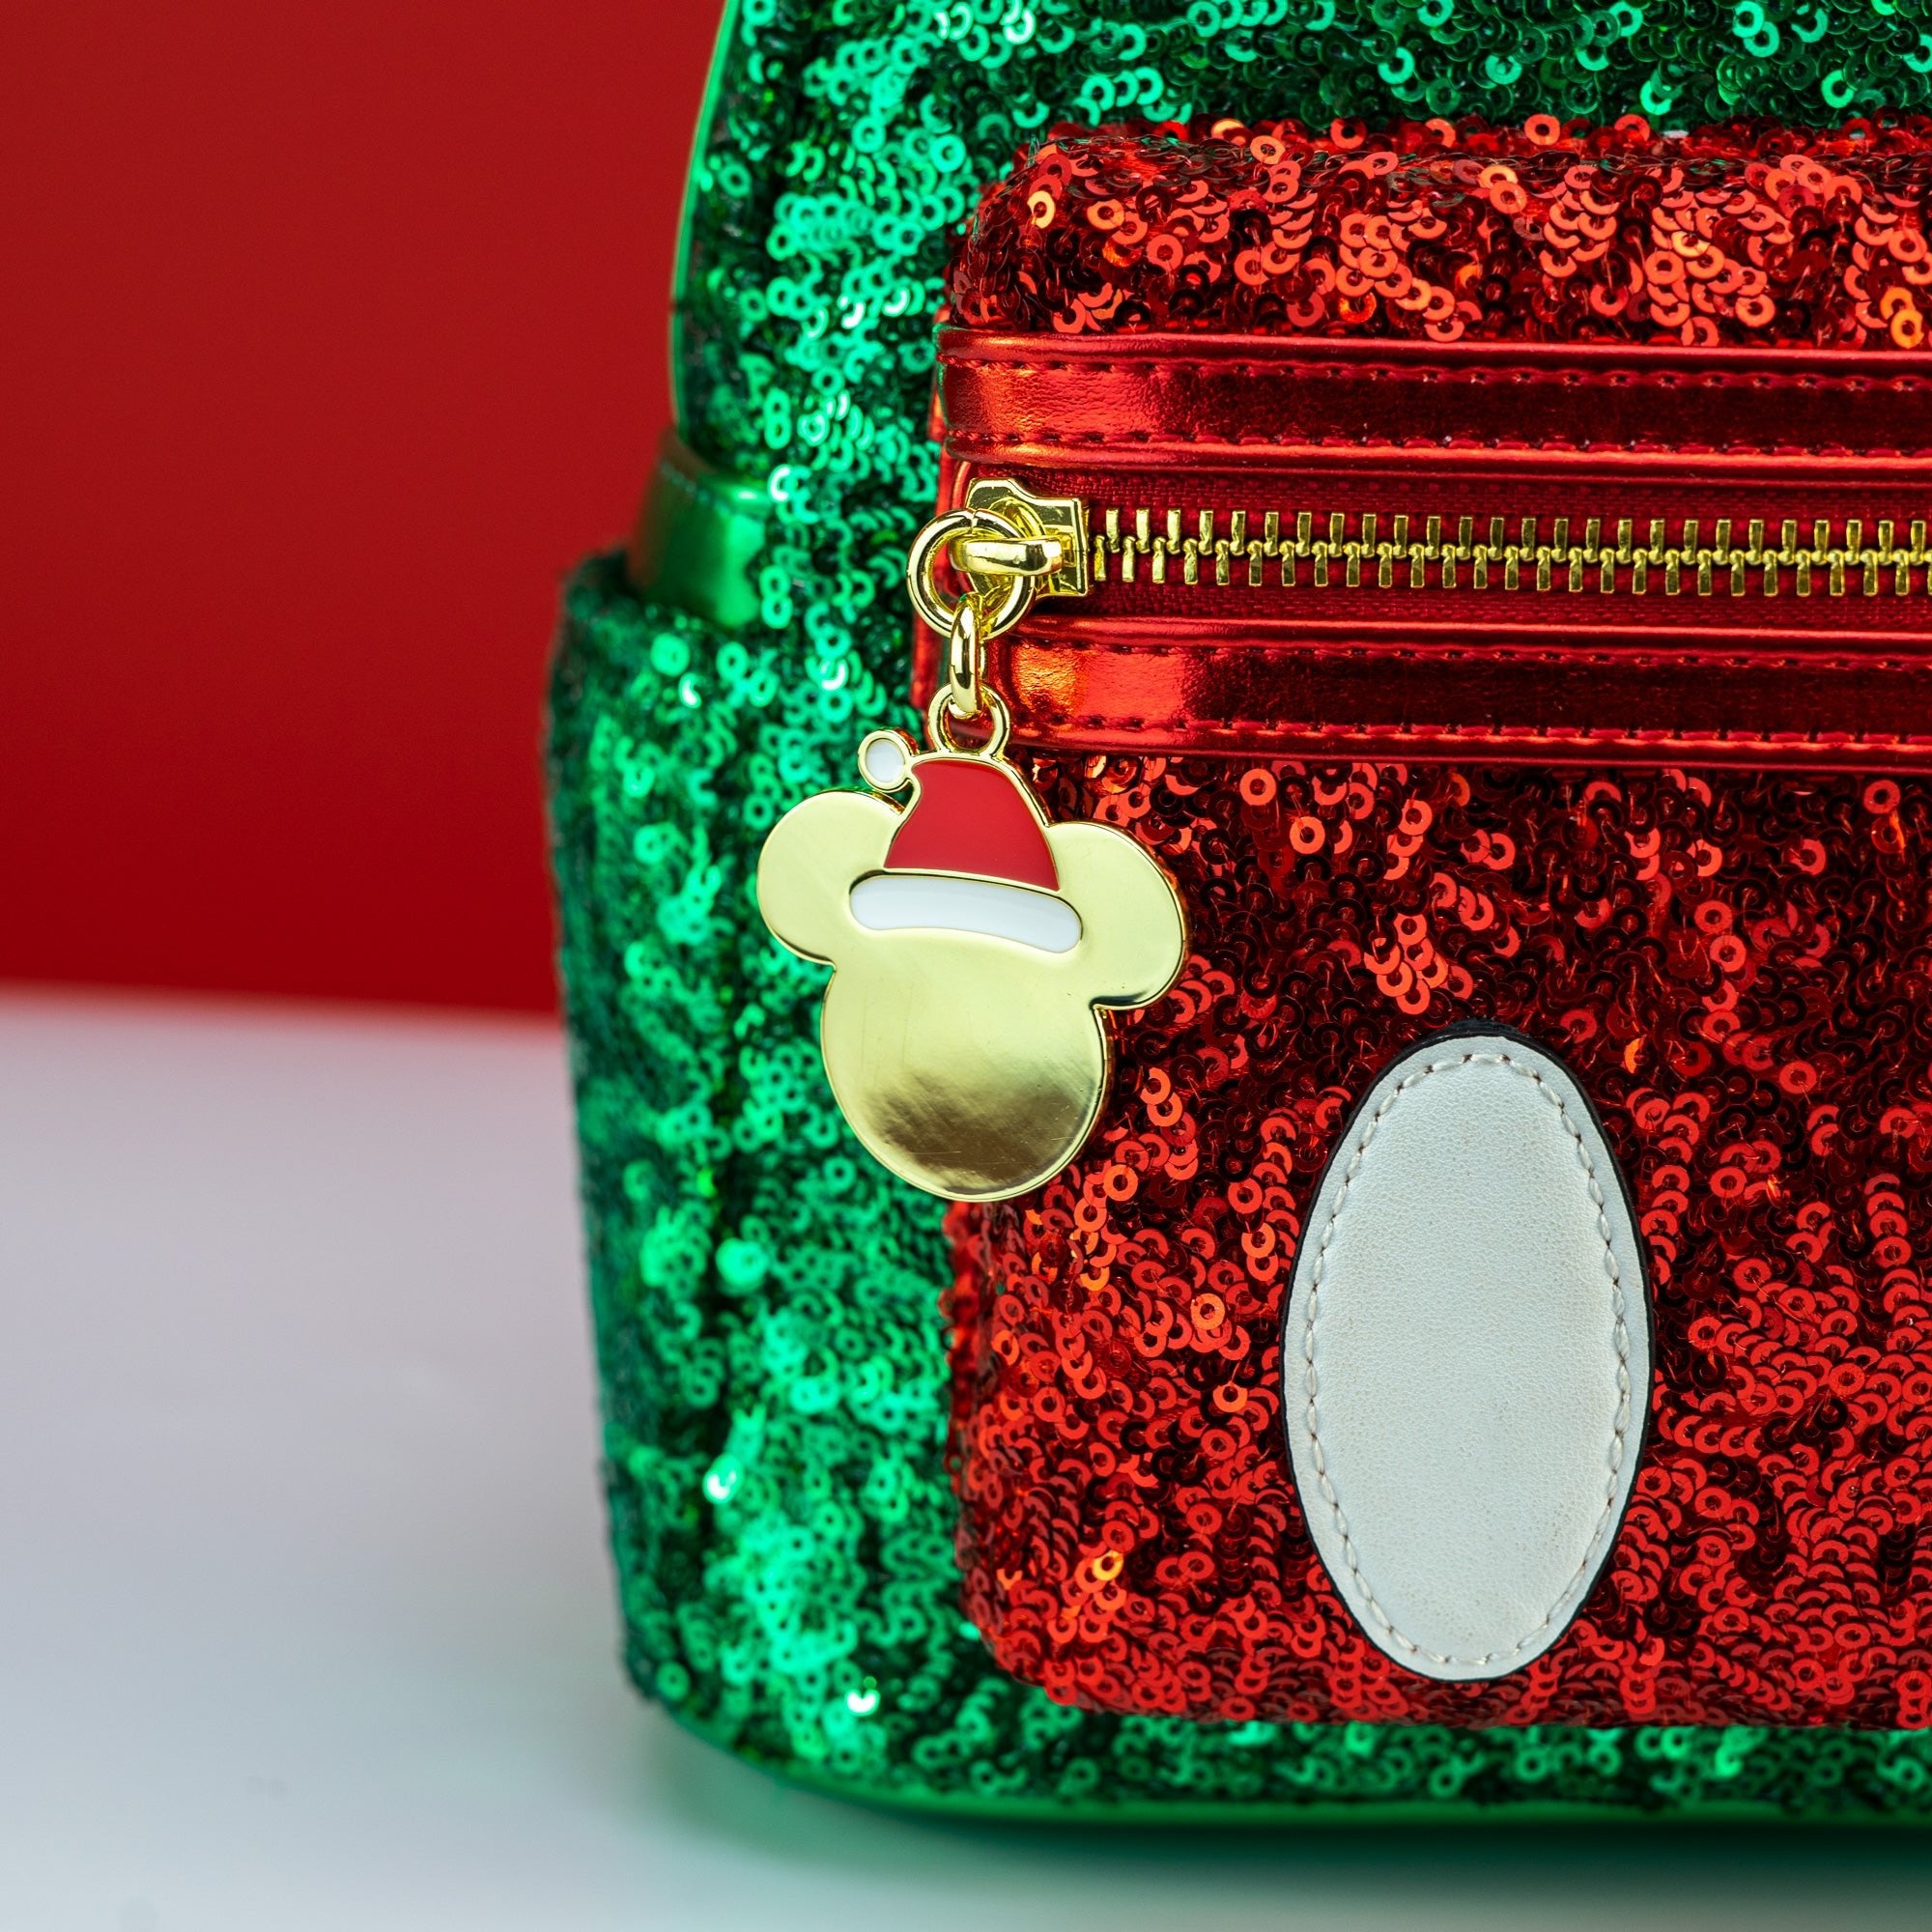 Loungefly x Disney Mickey Mouse Red and Green Sequin Mini Backpack - GeekCore